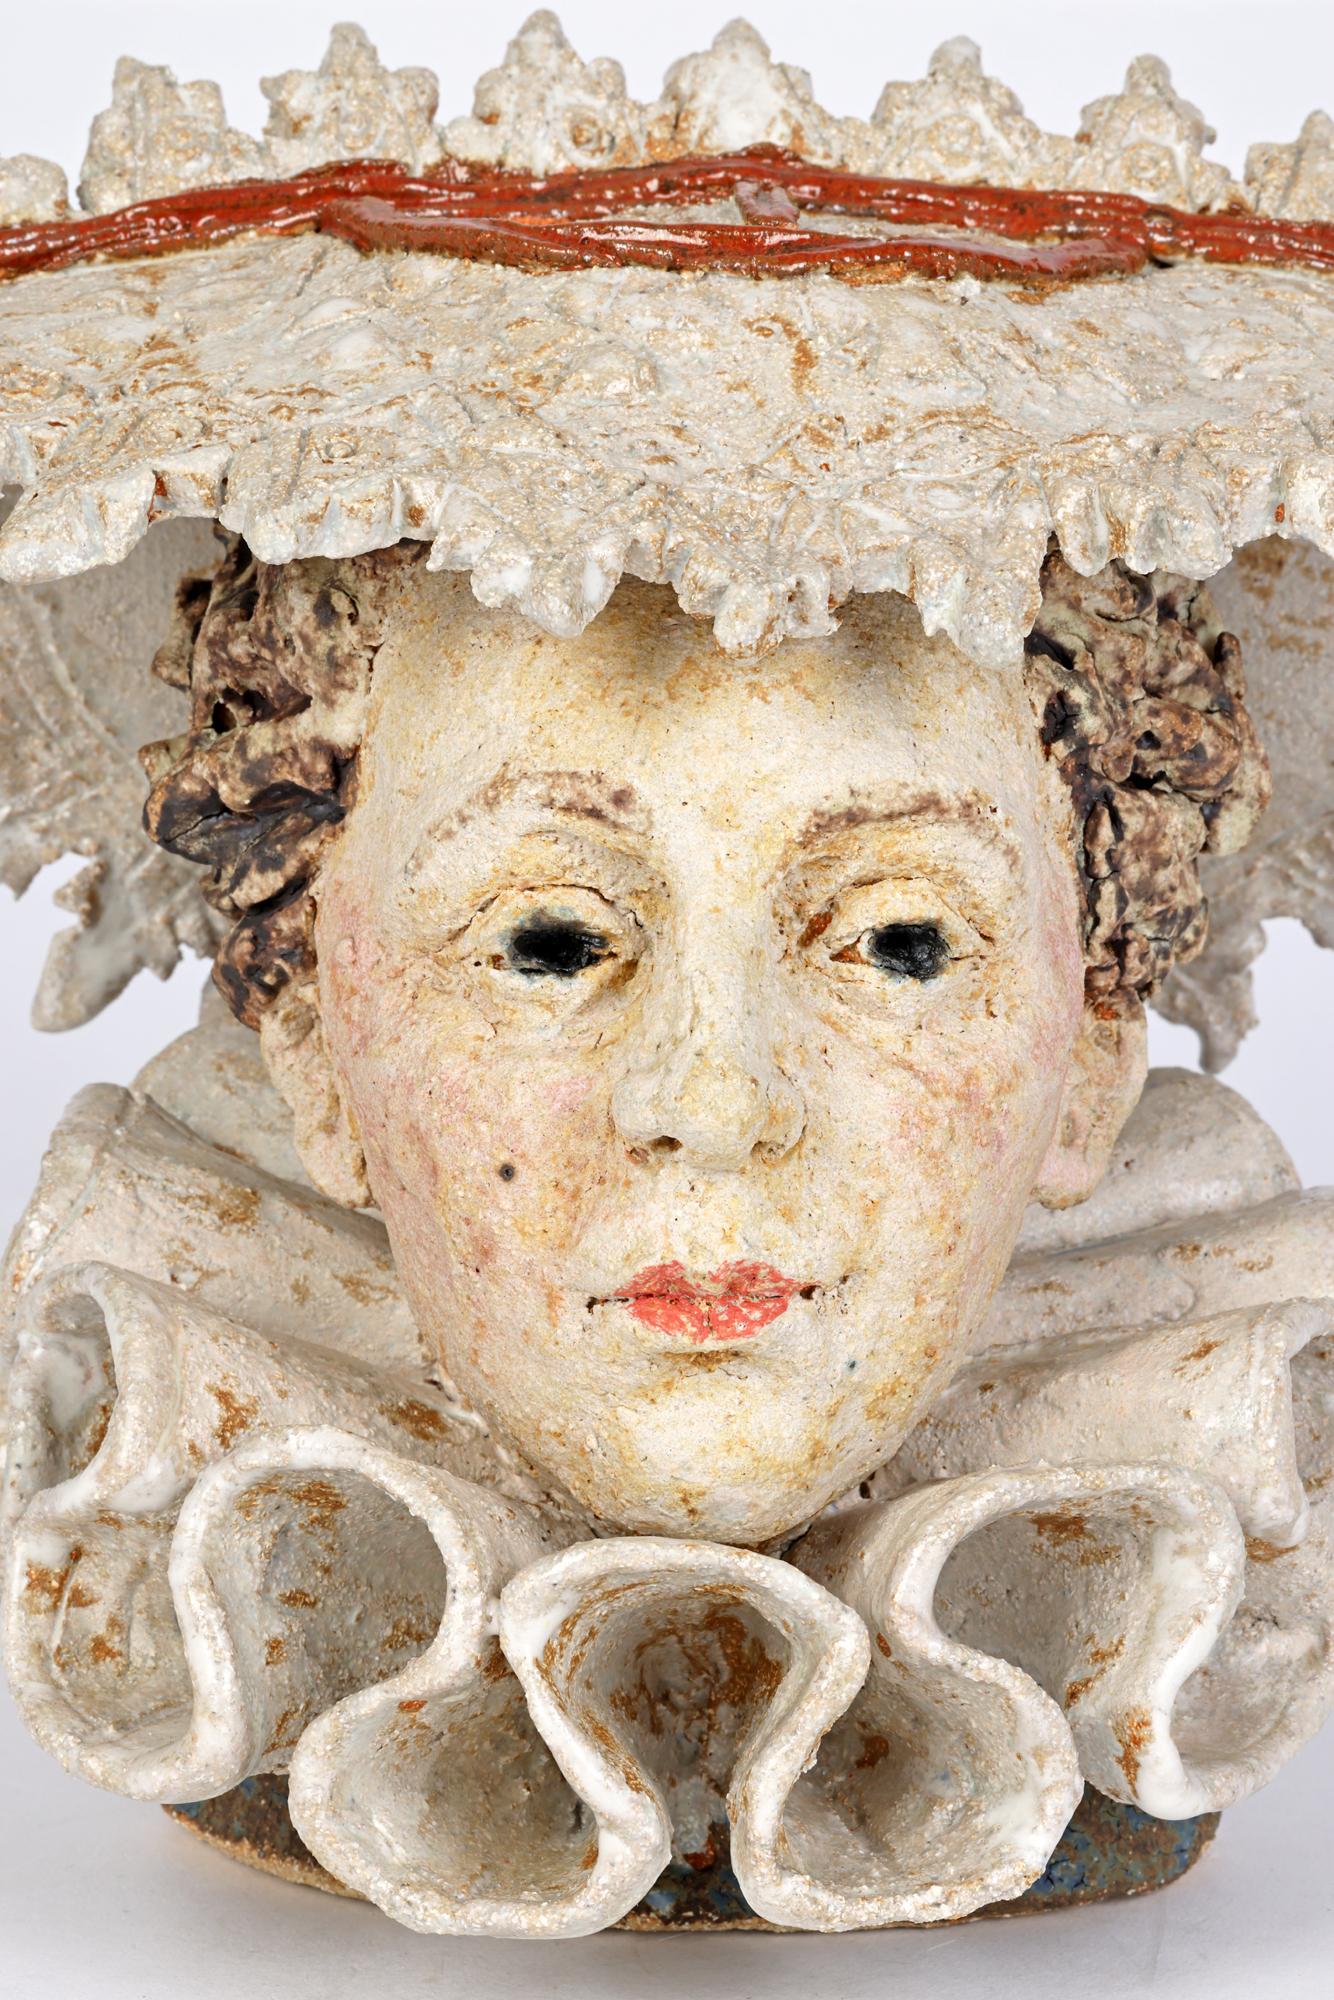 A very unusual midcentury handcrafted stoneware sculpture of an Elizabethan lady’s head, possibly Elizabeth I, wearing a period hat and ruff collar attributed to renowned artist and writer Quentin Bell (British, 1910-1996). The stoneware shoulder